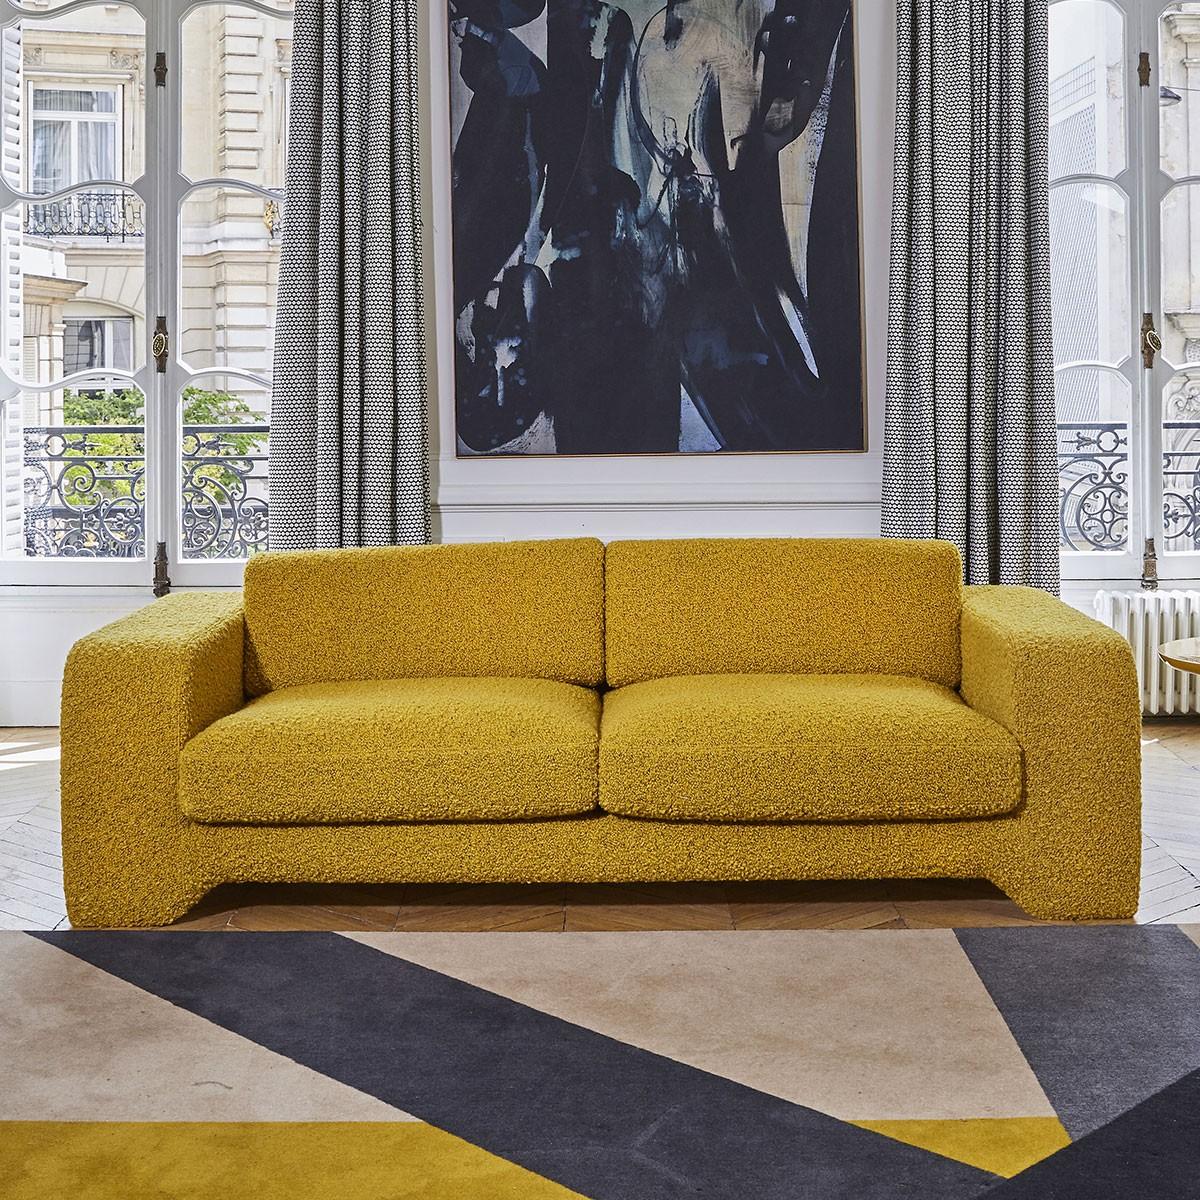 Popus Editions Giovanna 2.5 seater sofa in mole como velvet upholstery

Giovanna is a sofa with a strong profile. A sober, plush line, with this famous detail that changes everything, so as not to forget its strength of character and this charming